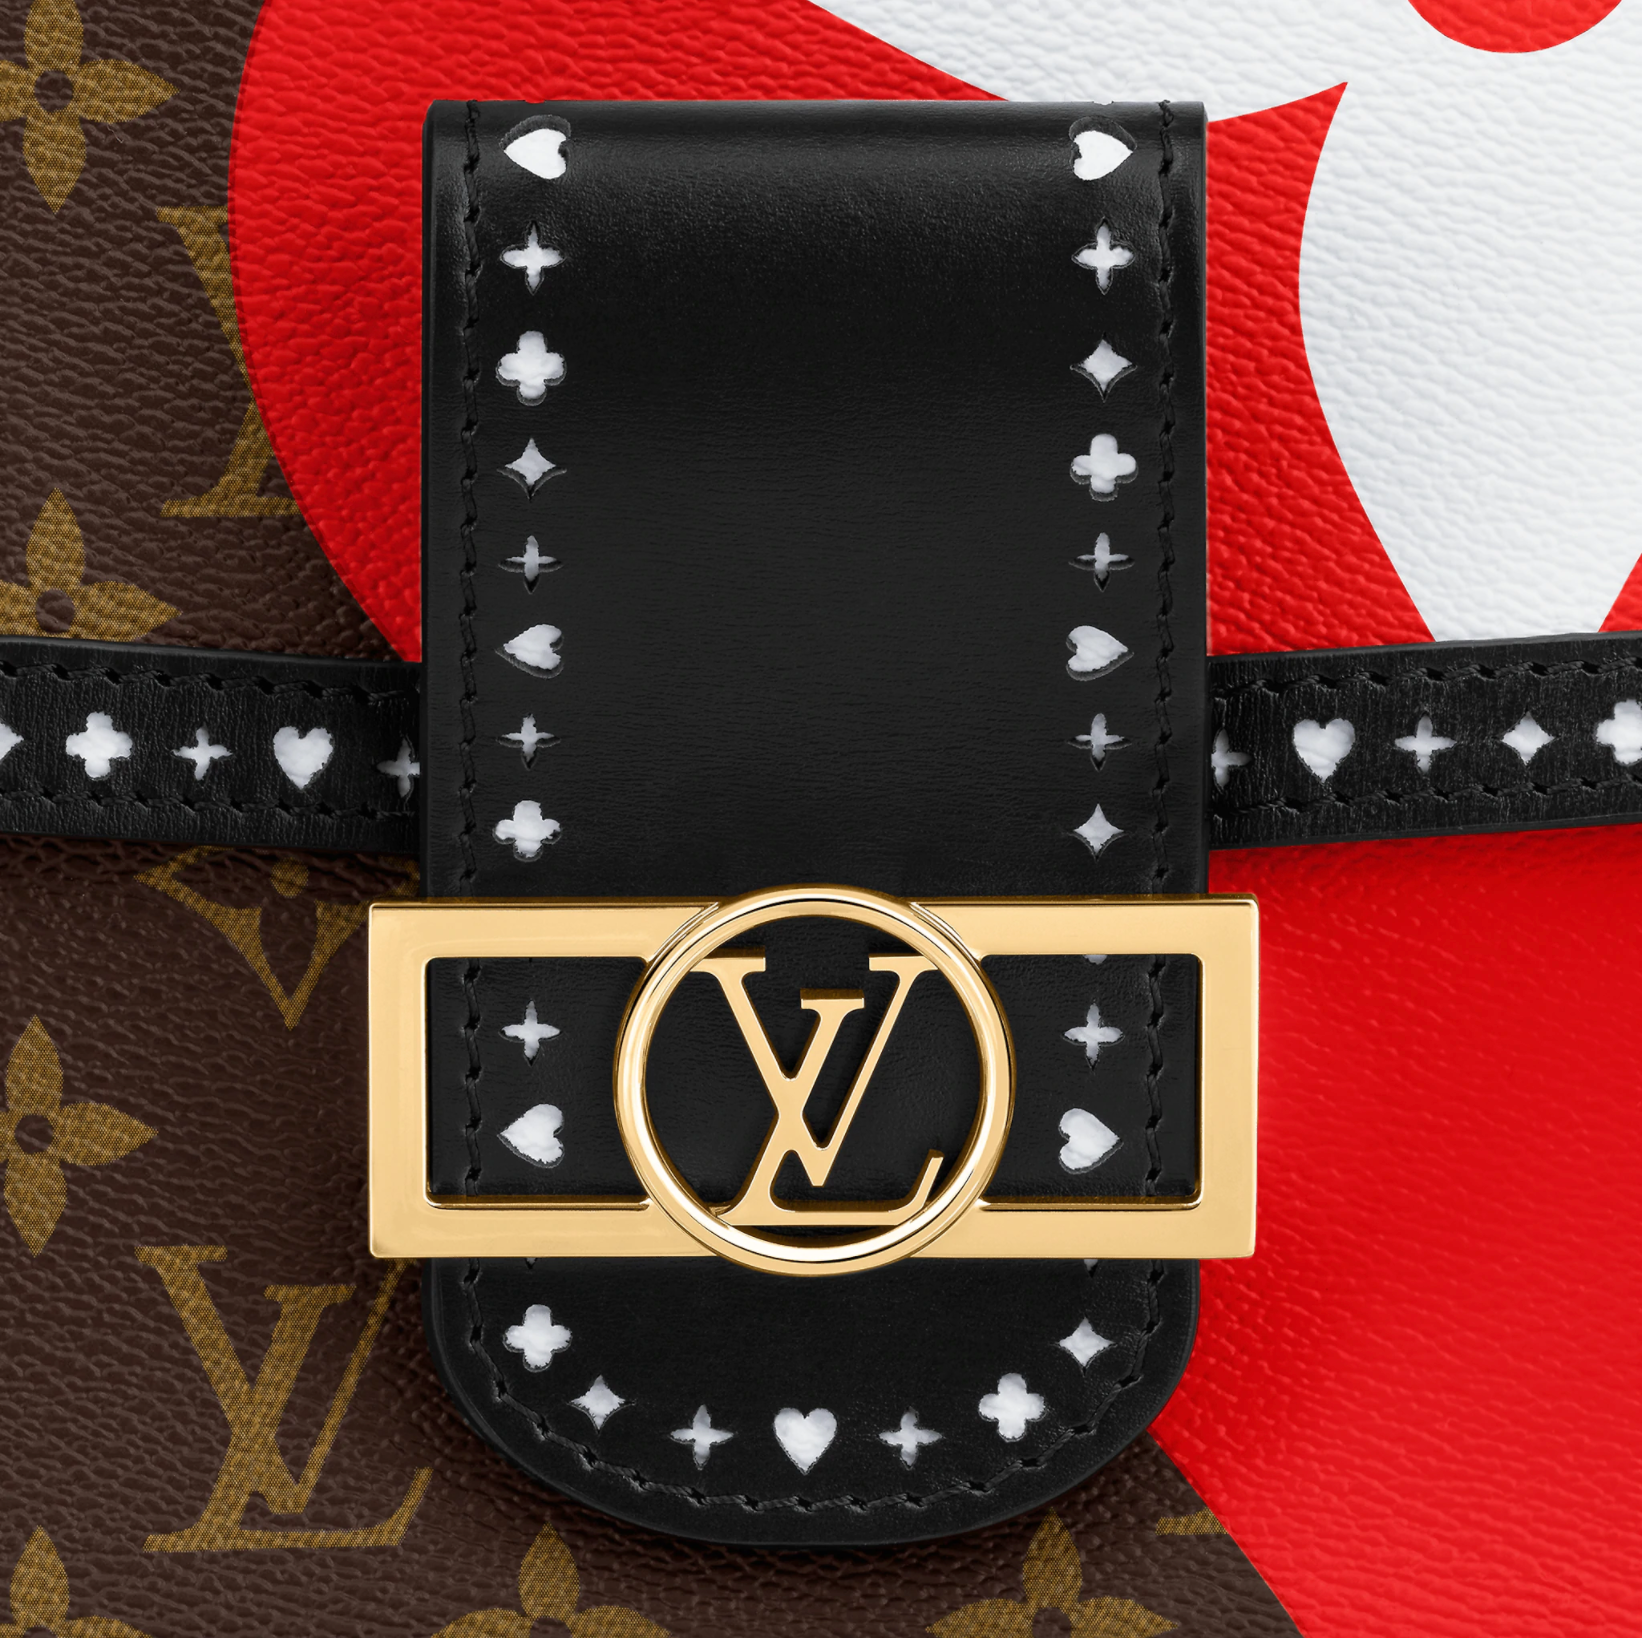 Louis Vuitton Game on Dauphine MM